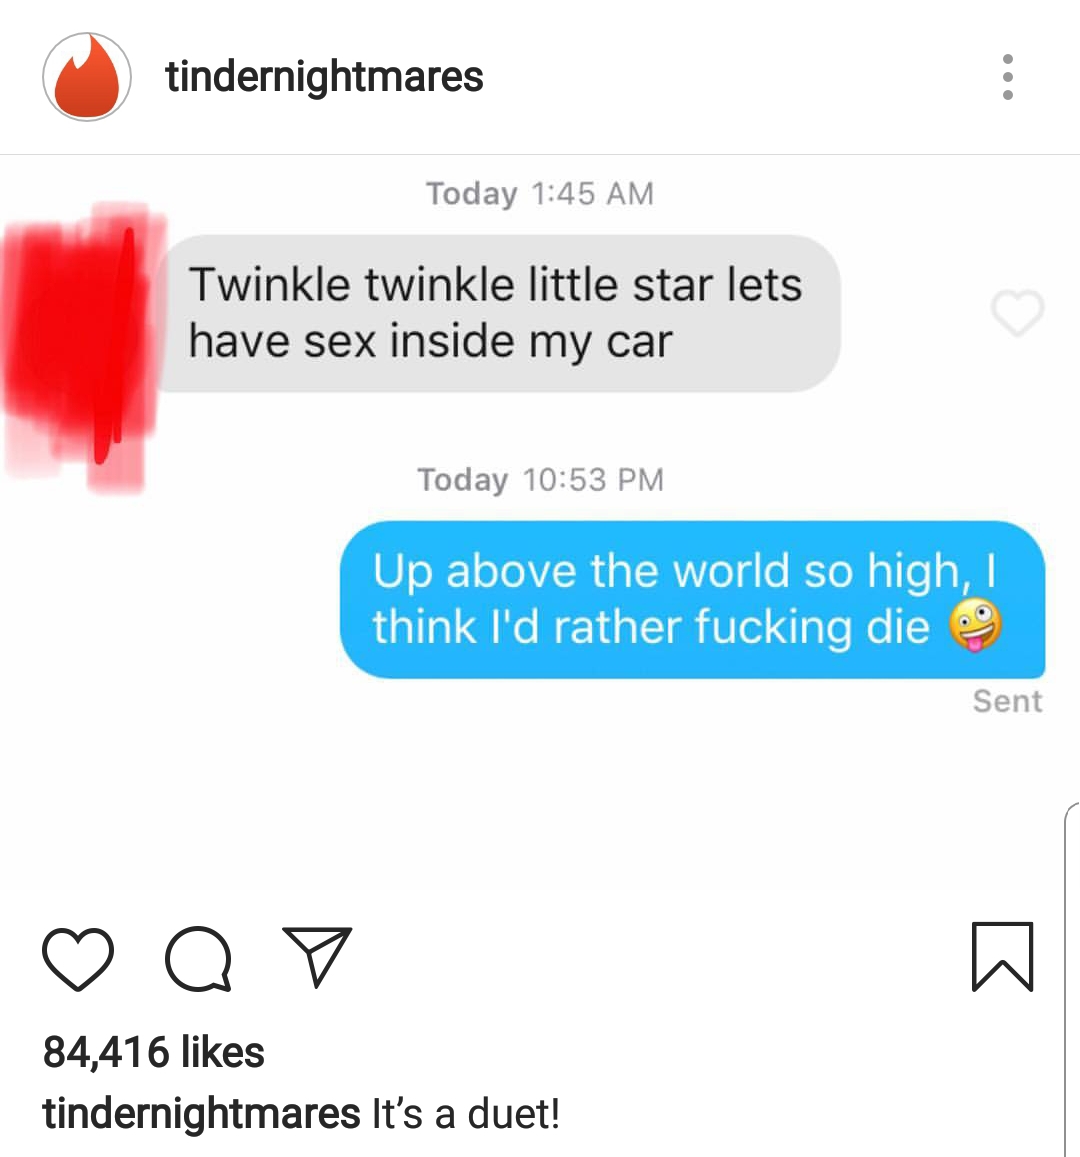 memes - tindernightmares Today Twinkle twinkle little star lets have sex inside my car Today Up above the world so high, think I'd rather fucking die Sent Q 7 84,416 tindernightmares It's a duet!